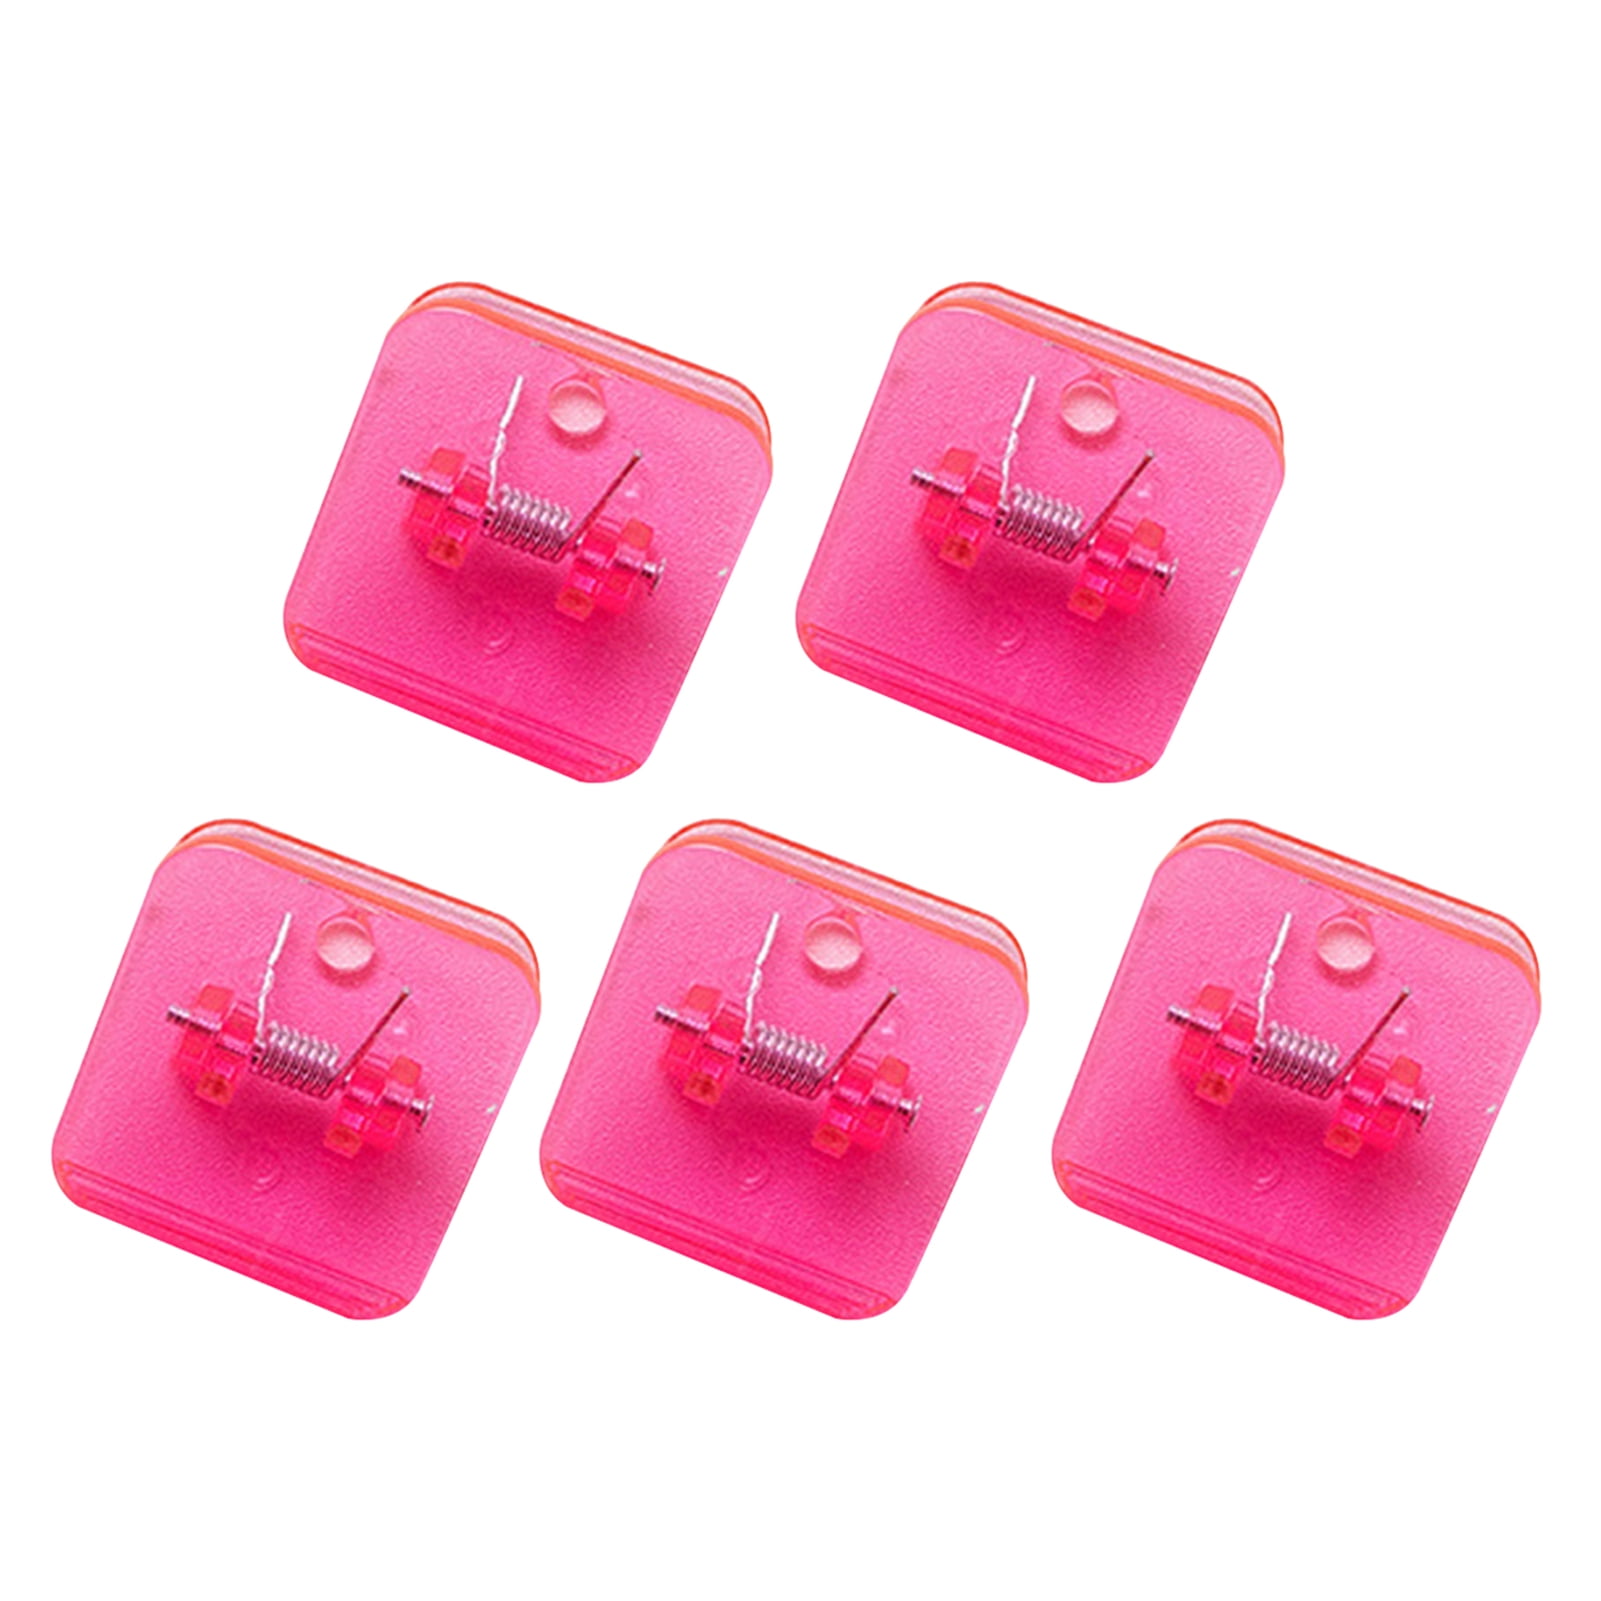 VILLCASE 150 Pcs Label Folder Small Spring Clips Clear Clips Transparent  Spring Clips Tiny Clothespins Mini Clips for Photos Photo Clips Paper Clips